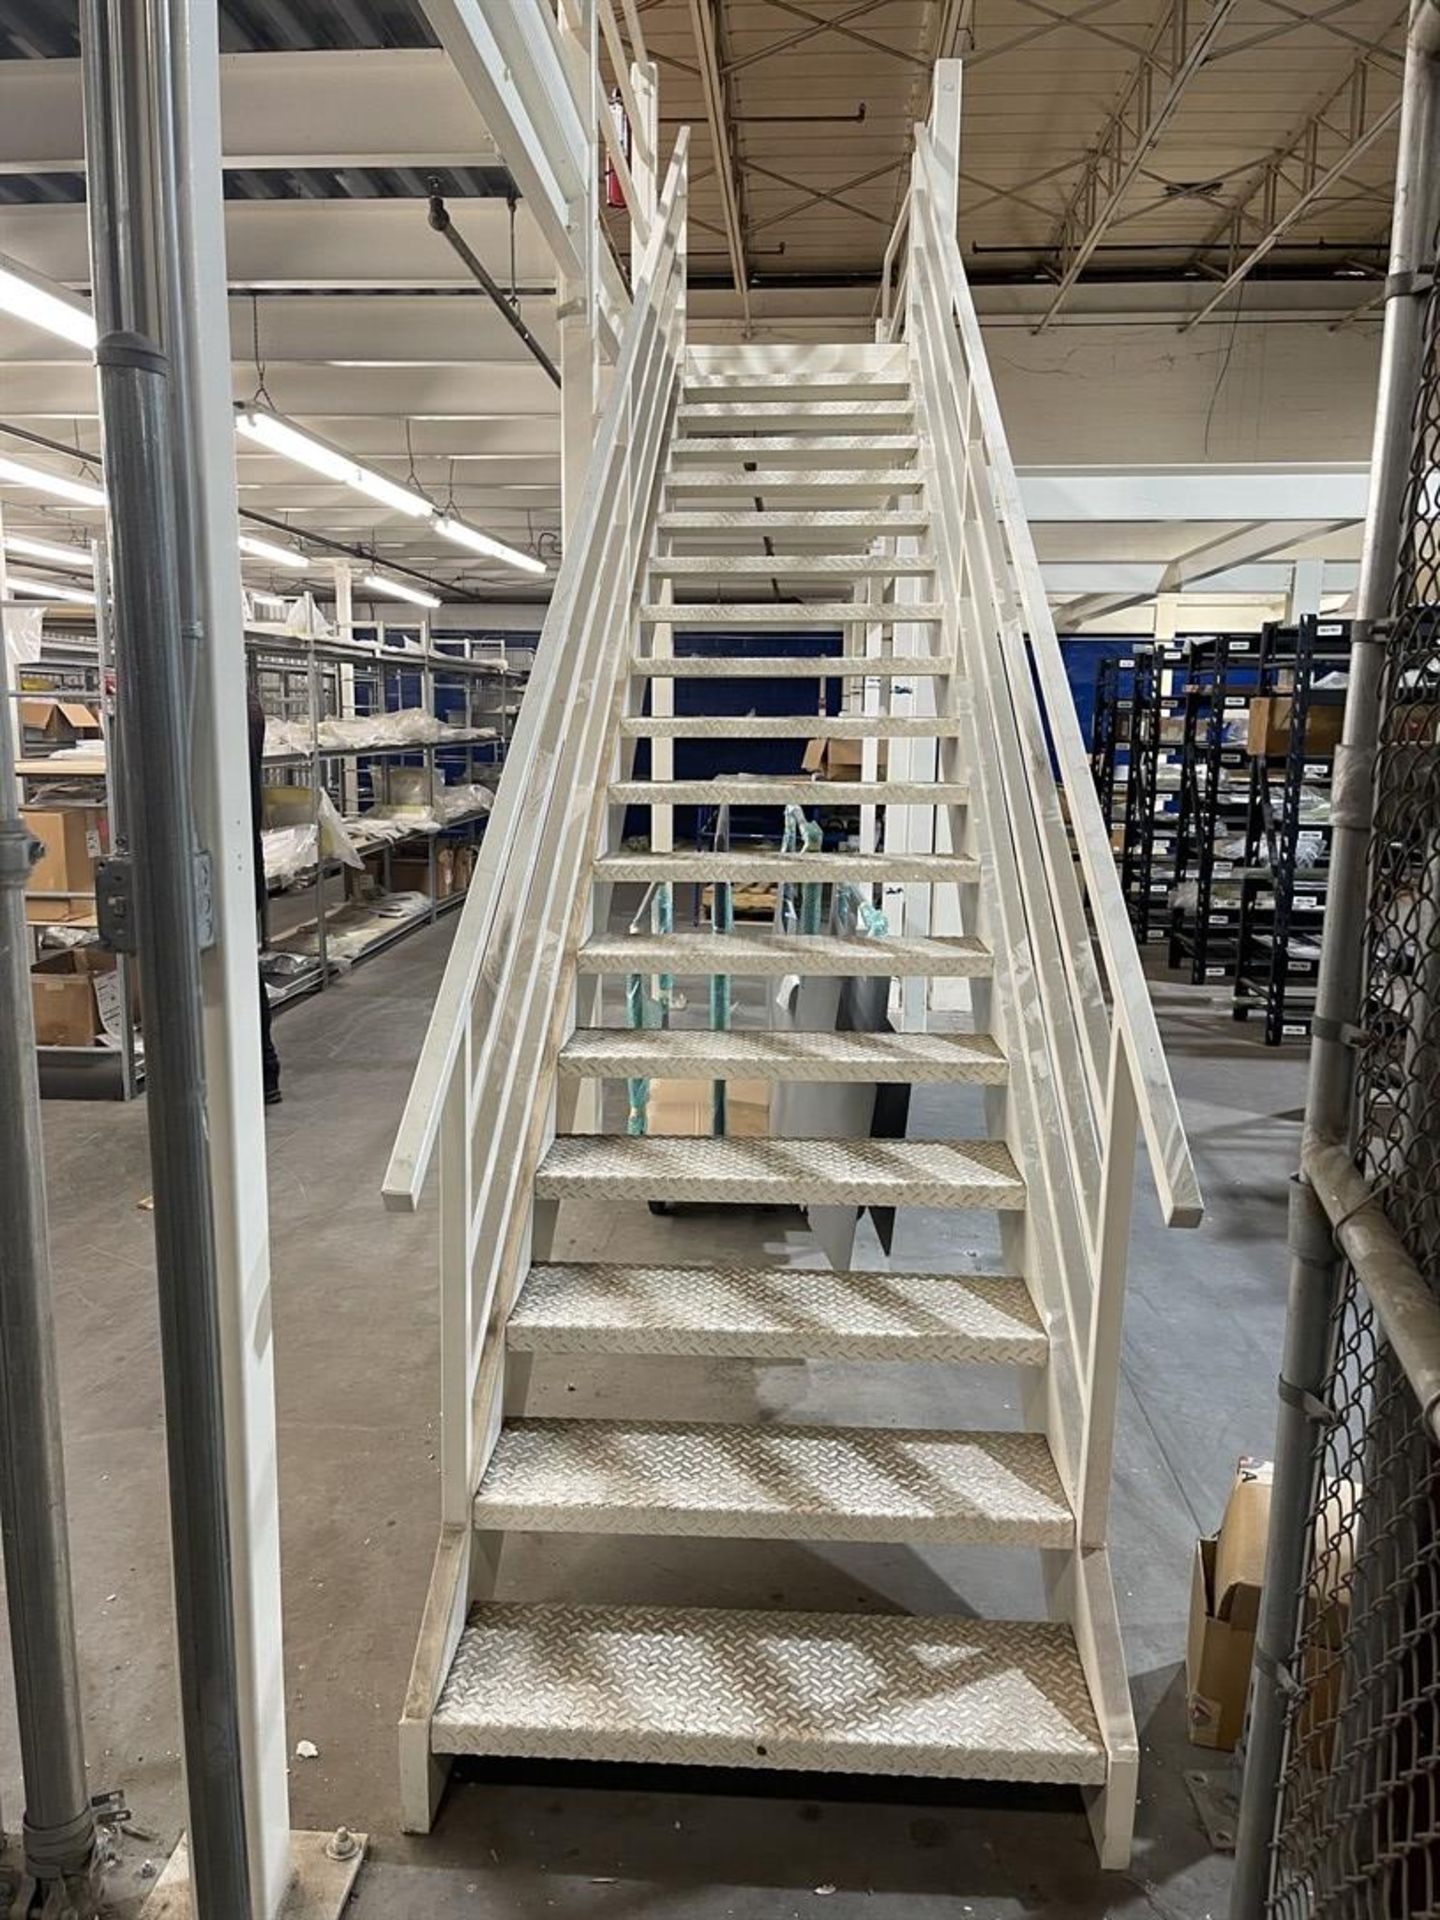 FREE STANDING 50’ x 30’ x 9’ BOLTED MEZZANINE w/ Stairway - Image 2 of 6